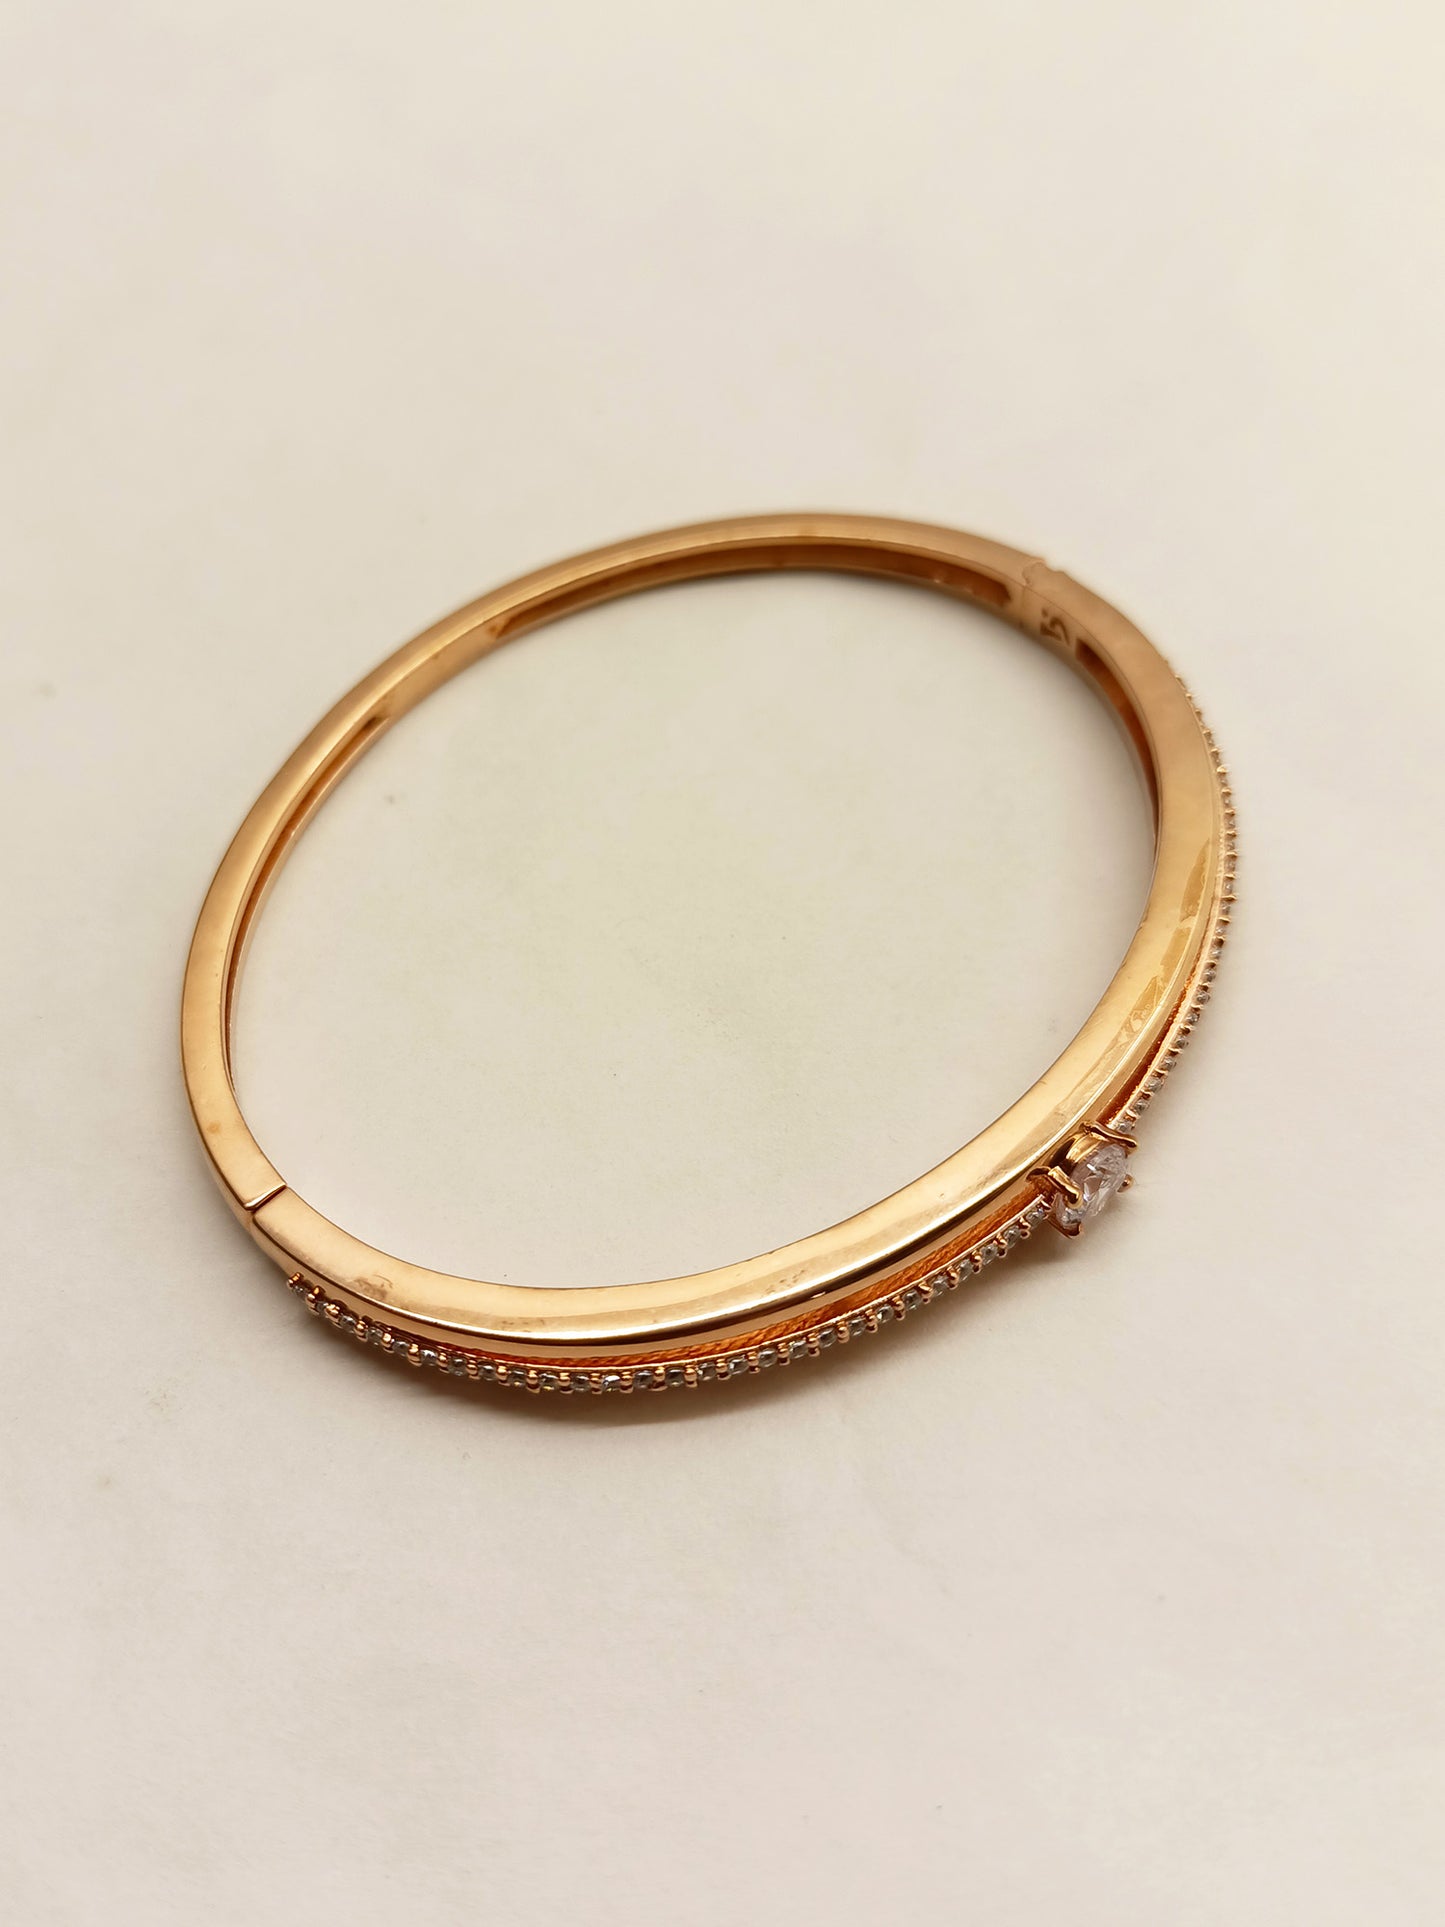 Malaysia Rose Gold Plated American Daimond Bracelet